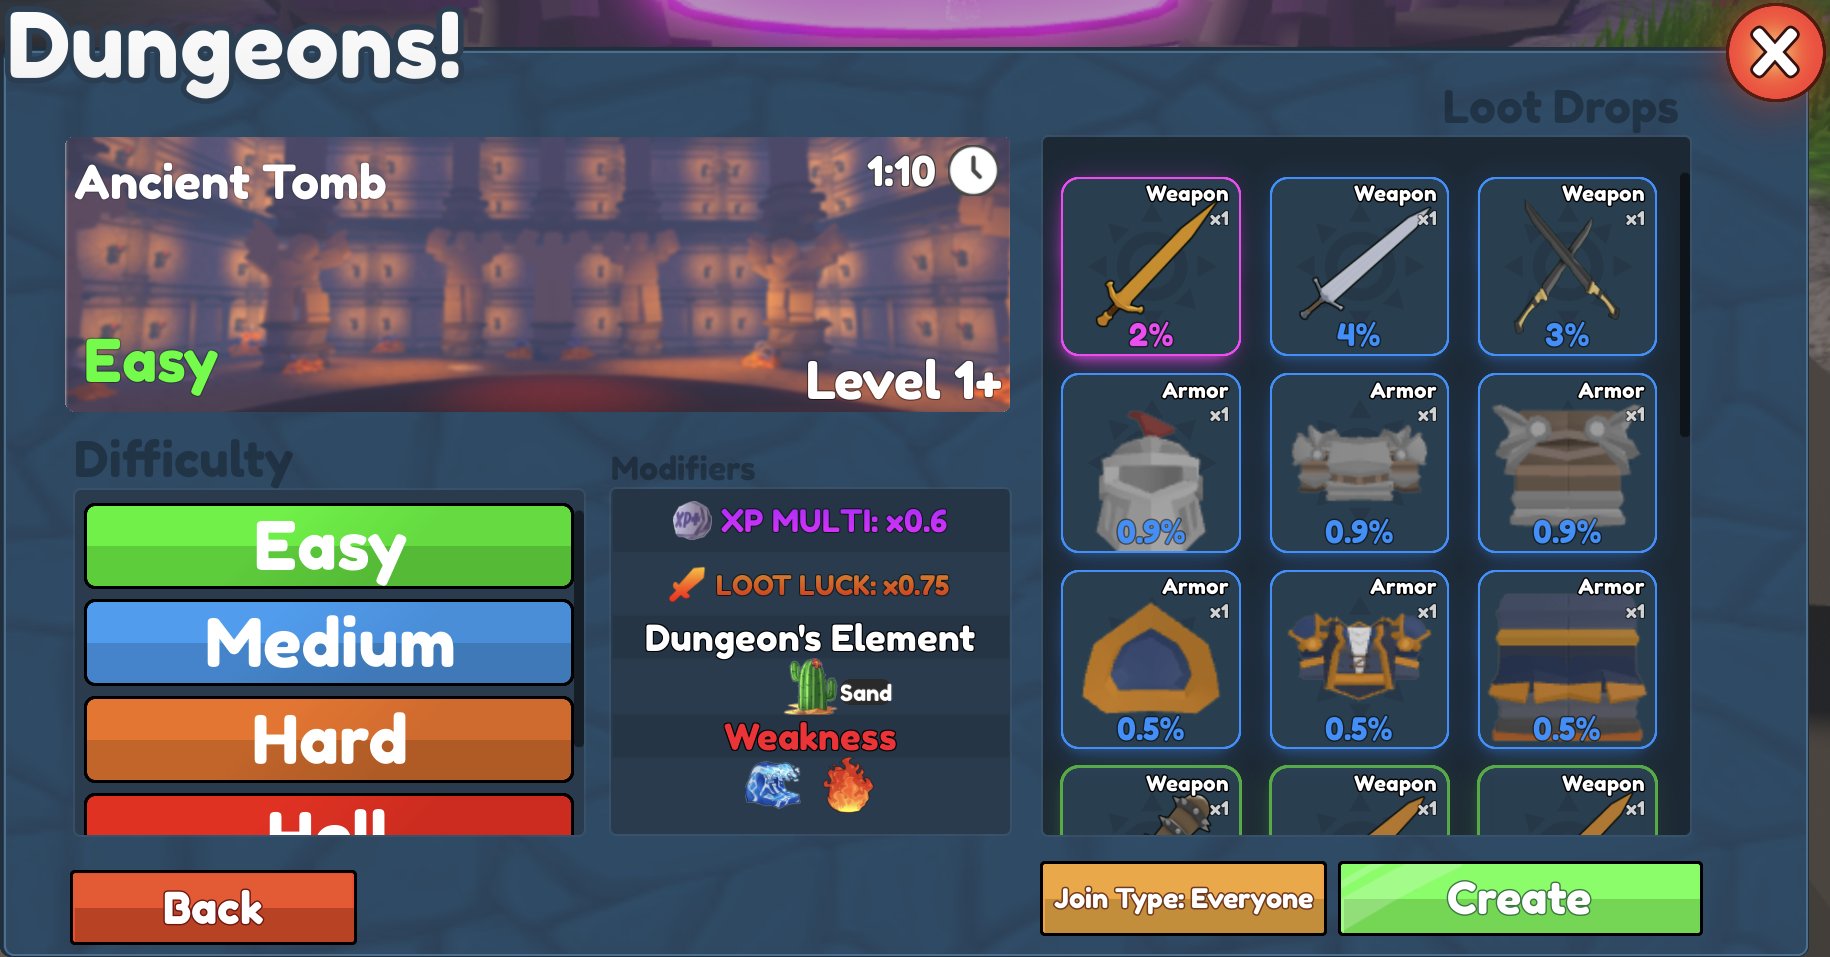 I HAVE SEEN UPDATE 3 CONTENT, Elemental Dungeons